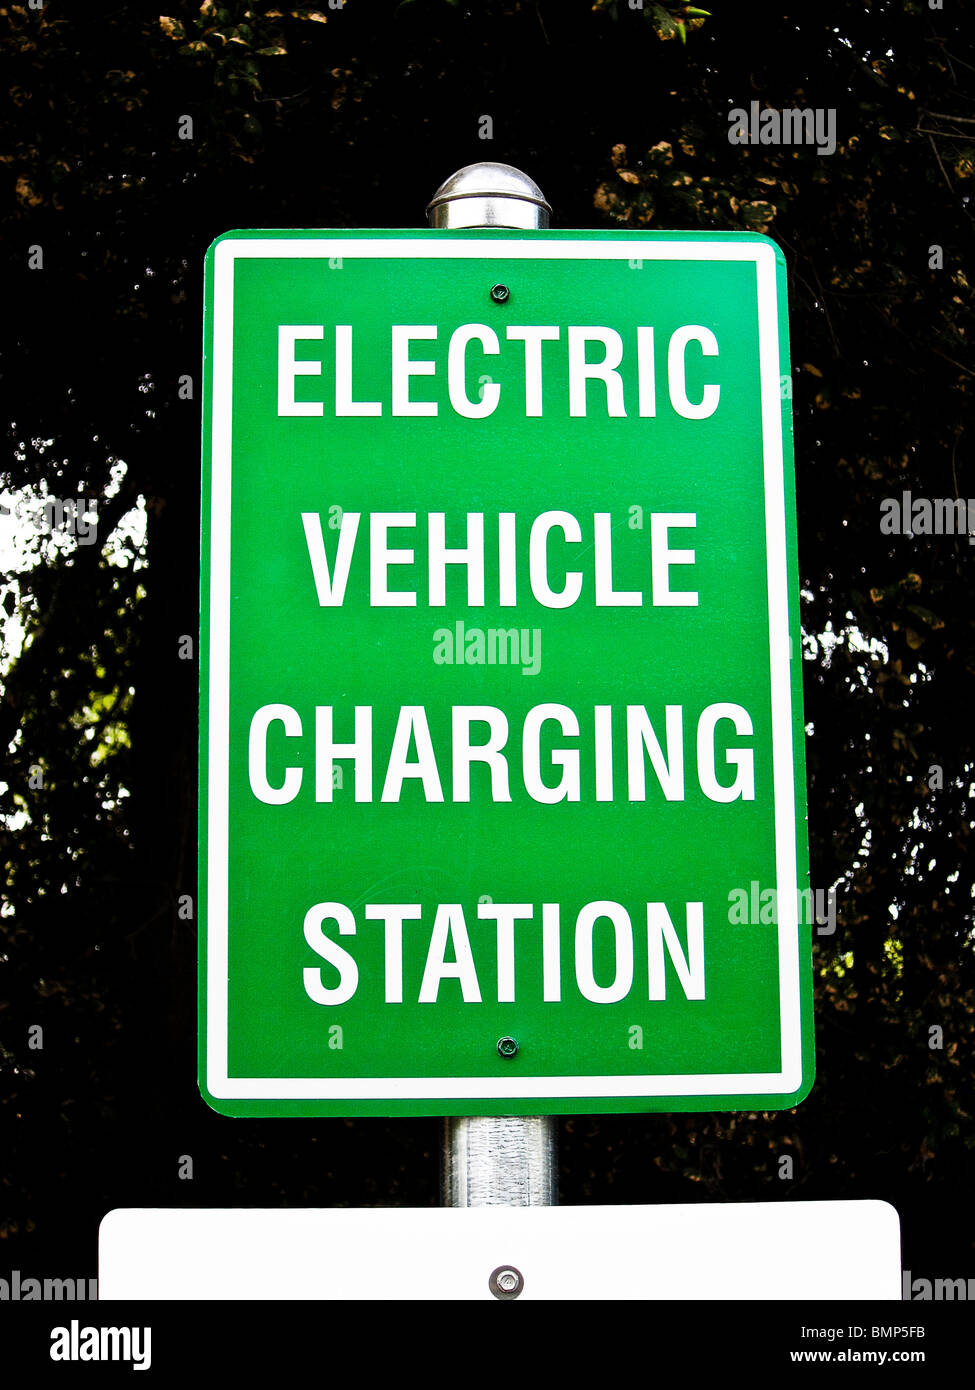 Charging station sign for electric vehicles, bank parking lot, Atascadero, California. Stock Photo